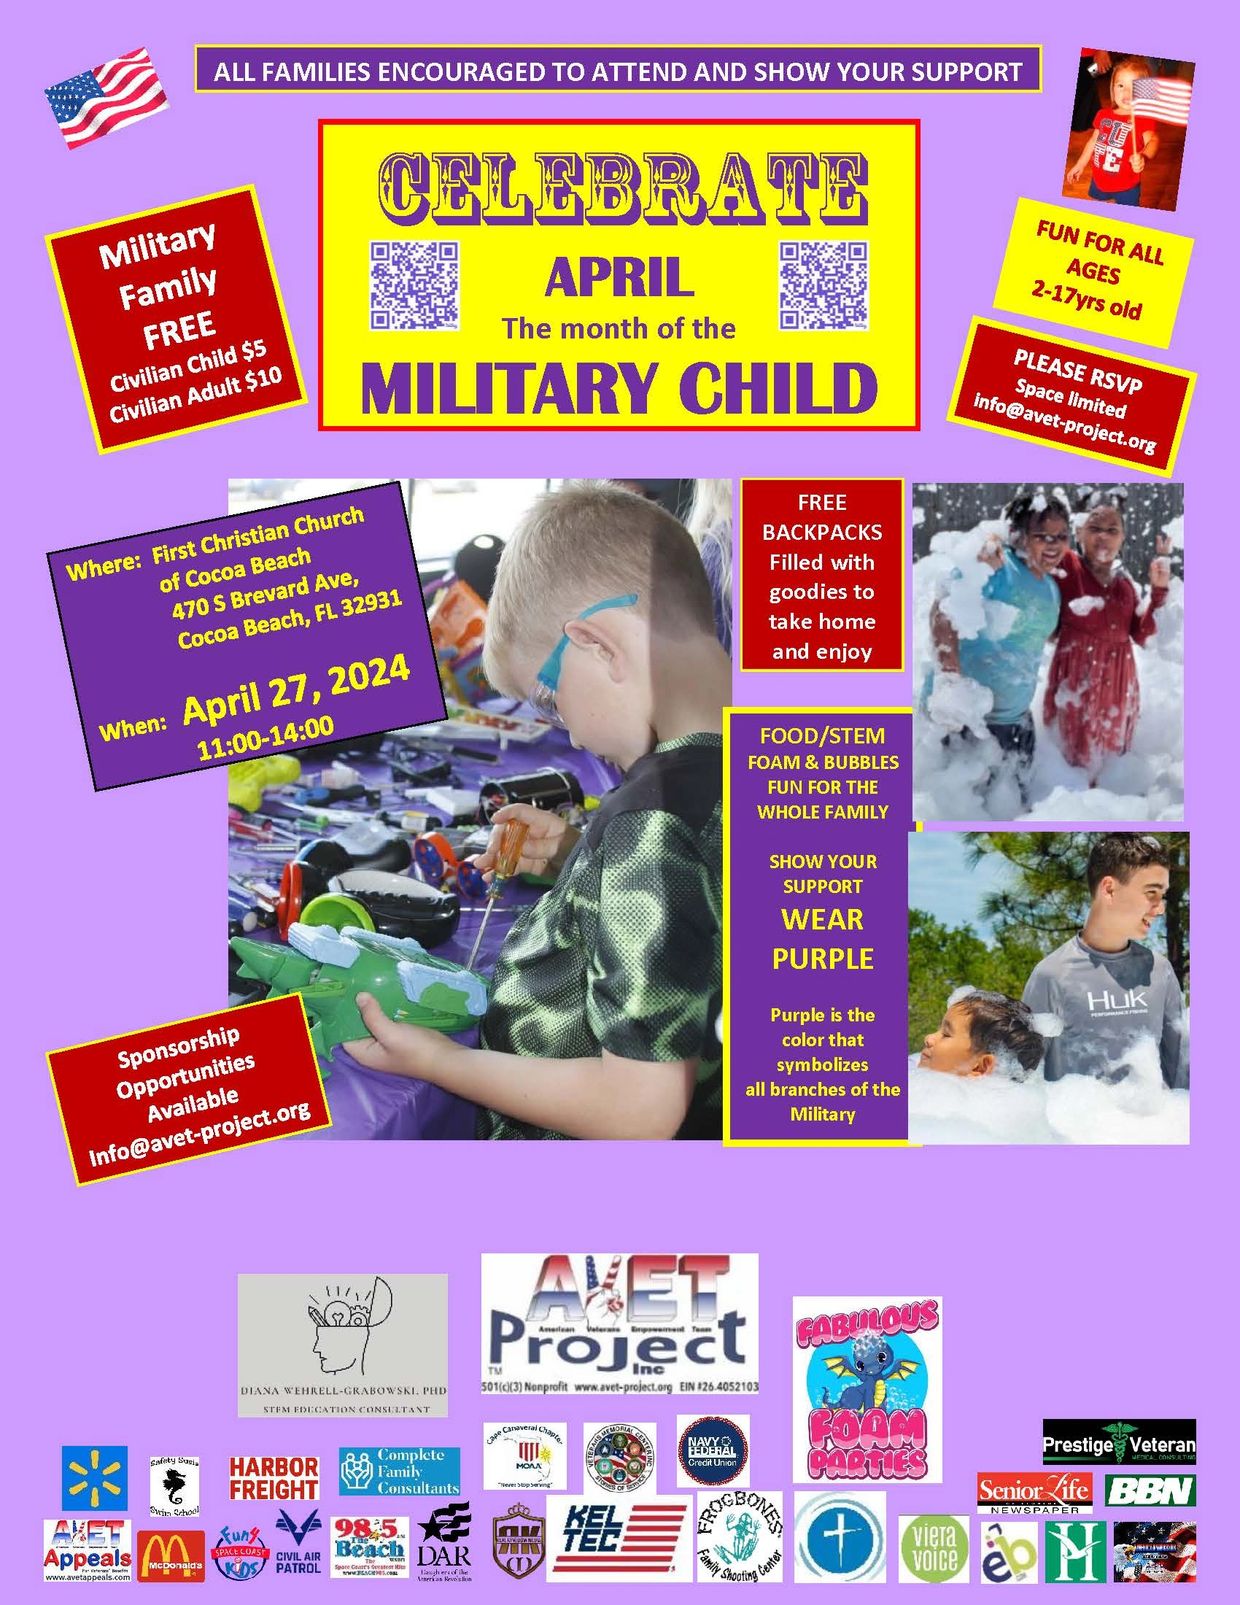 Everyone is welcome and encouraged to attend to show your support for our Military  children